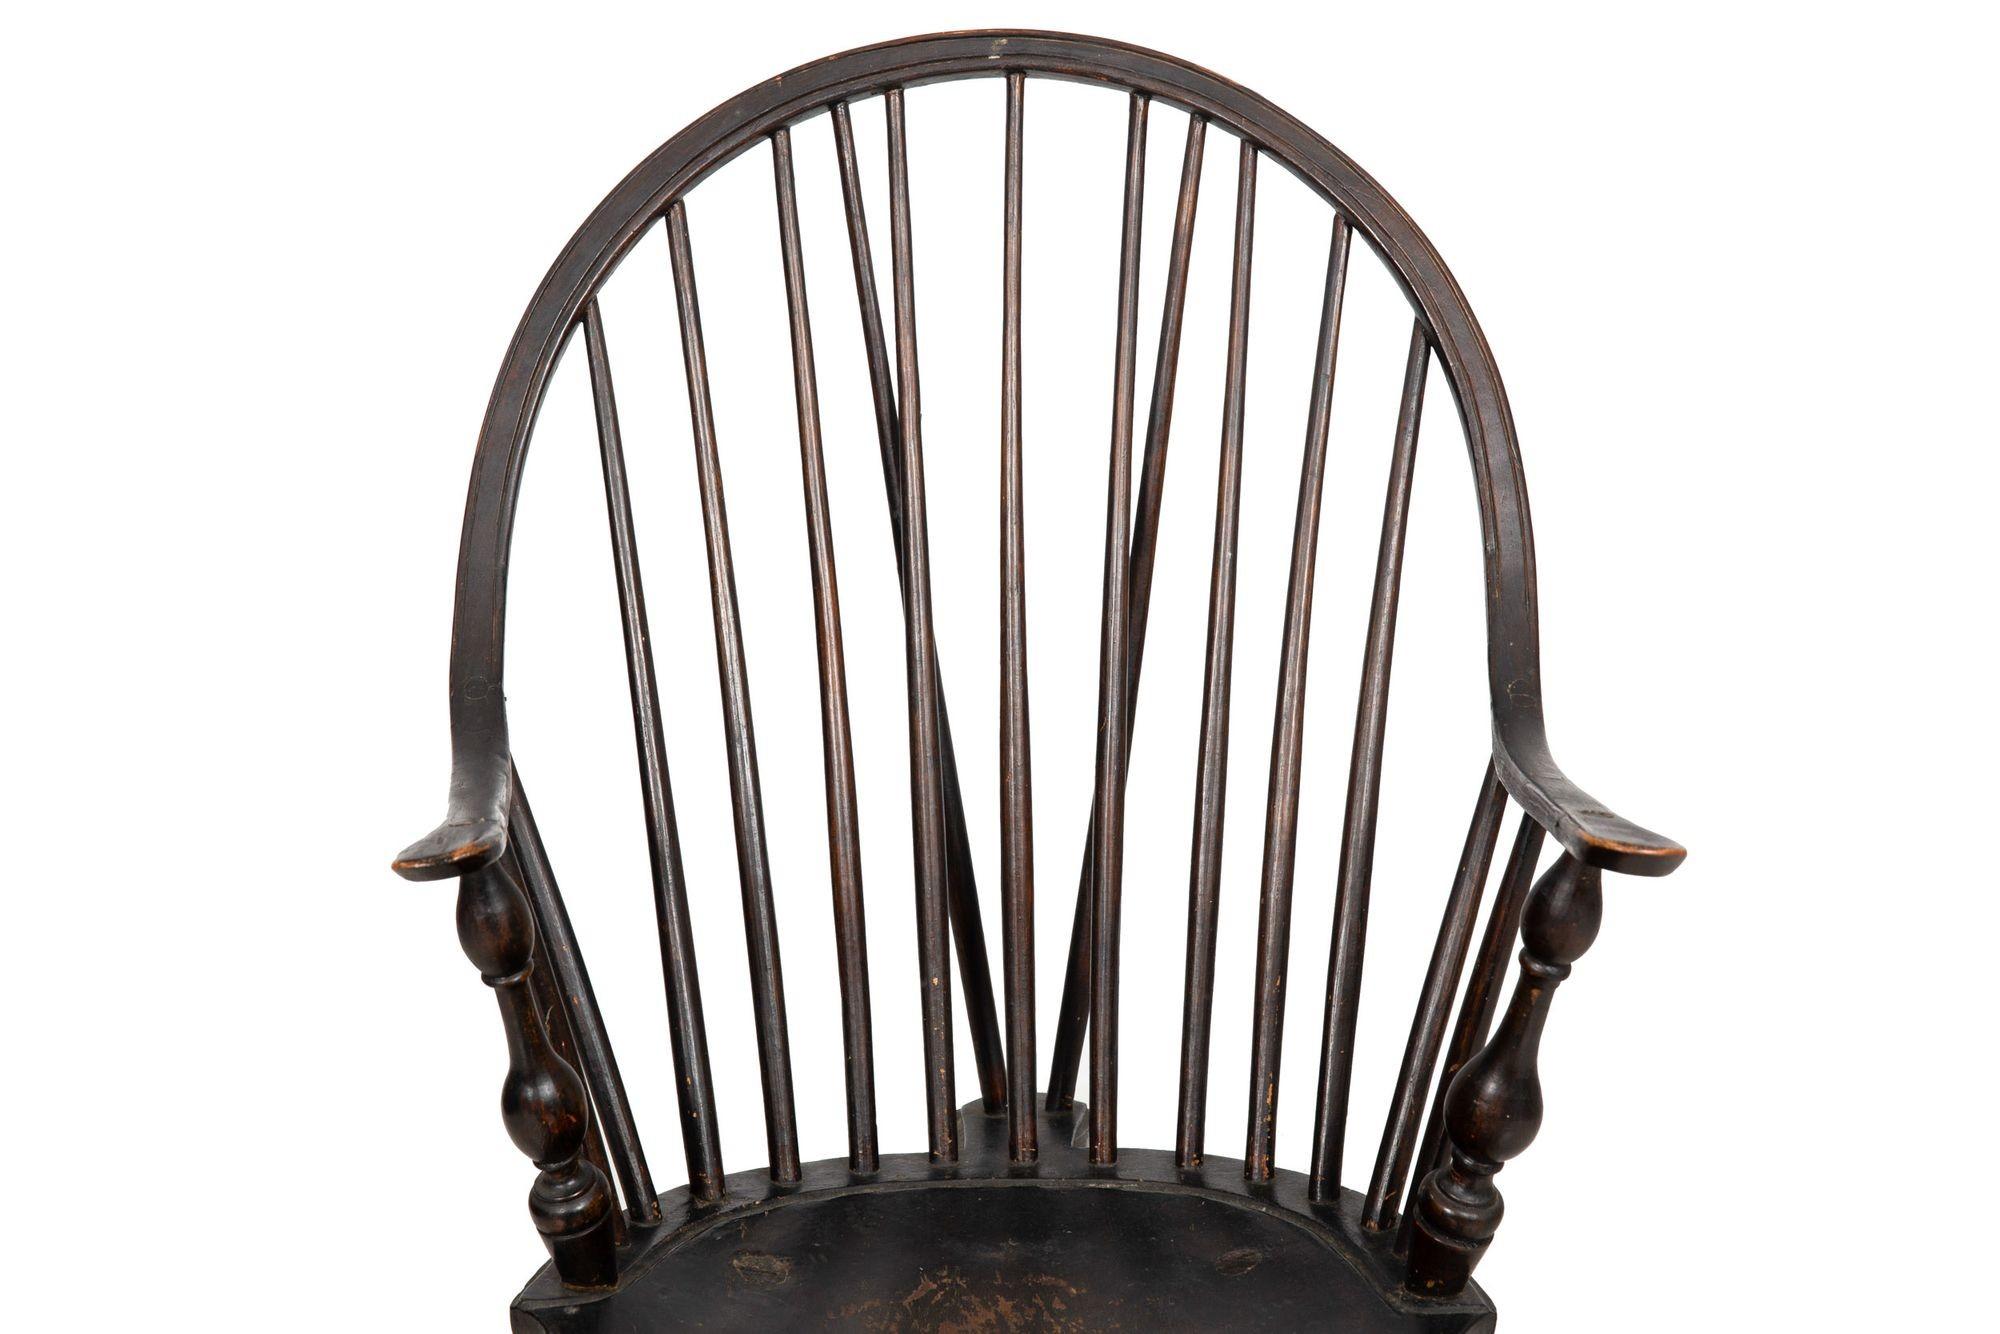 Rare American Brace-Back Continuous Arm Windsor Chair, New York ca. 1790 2